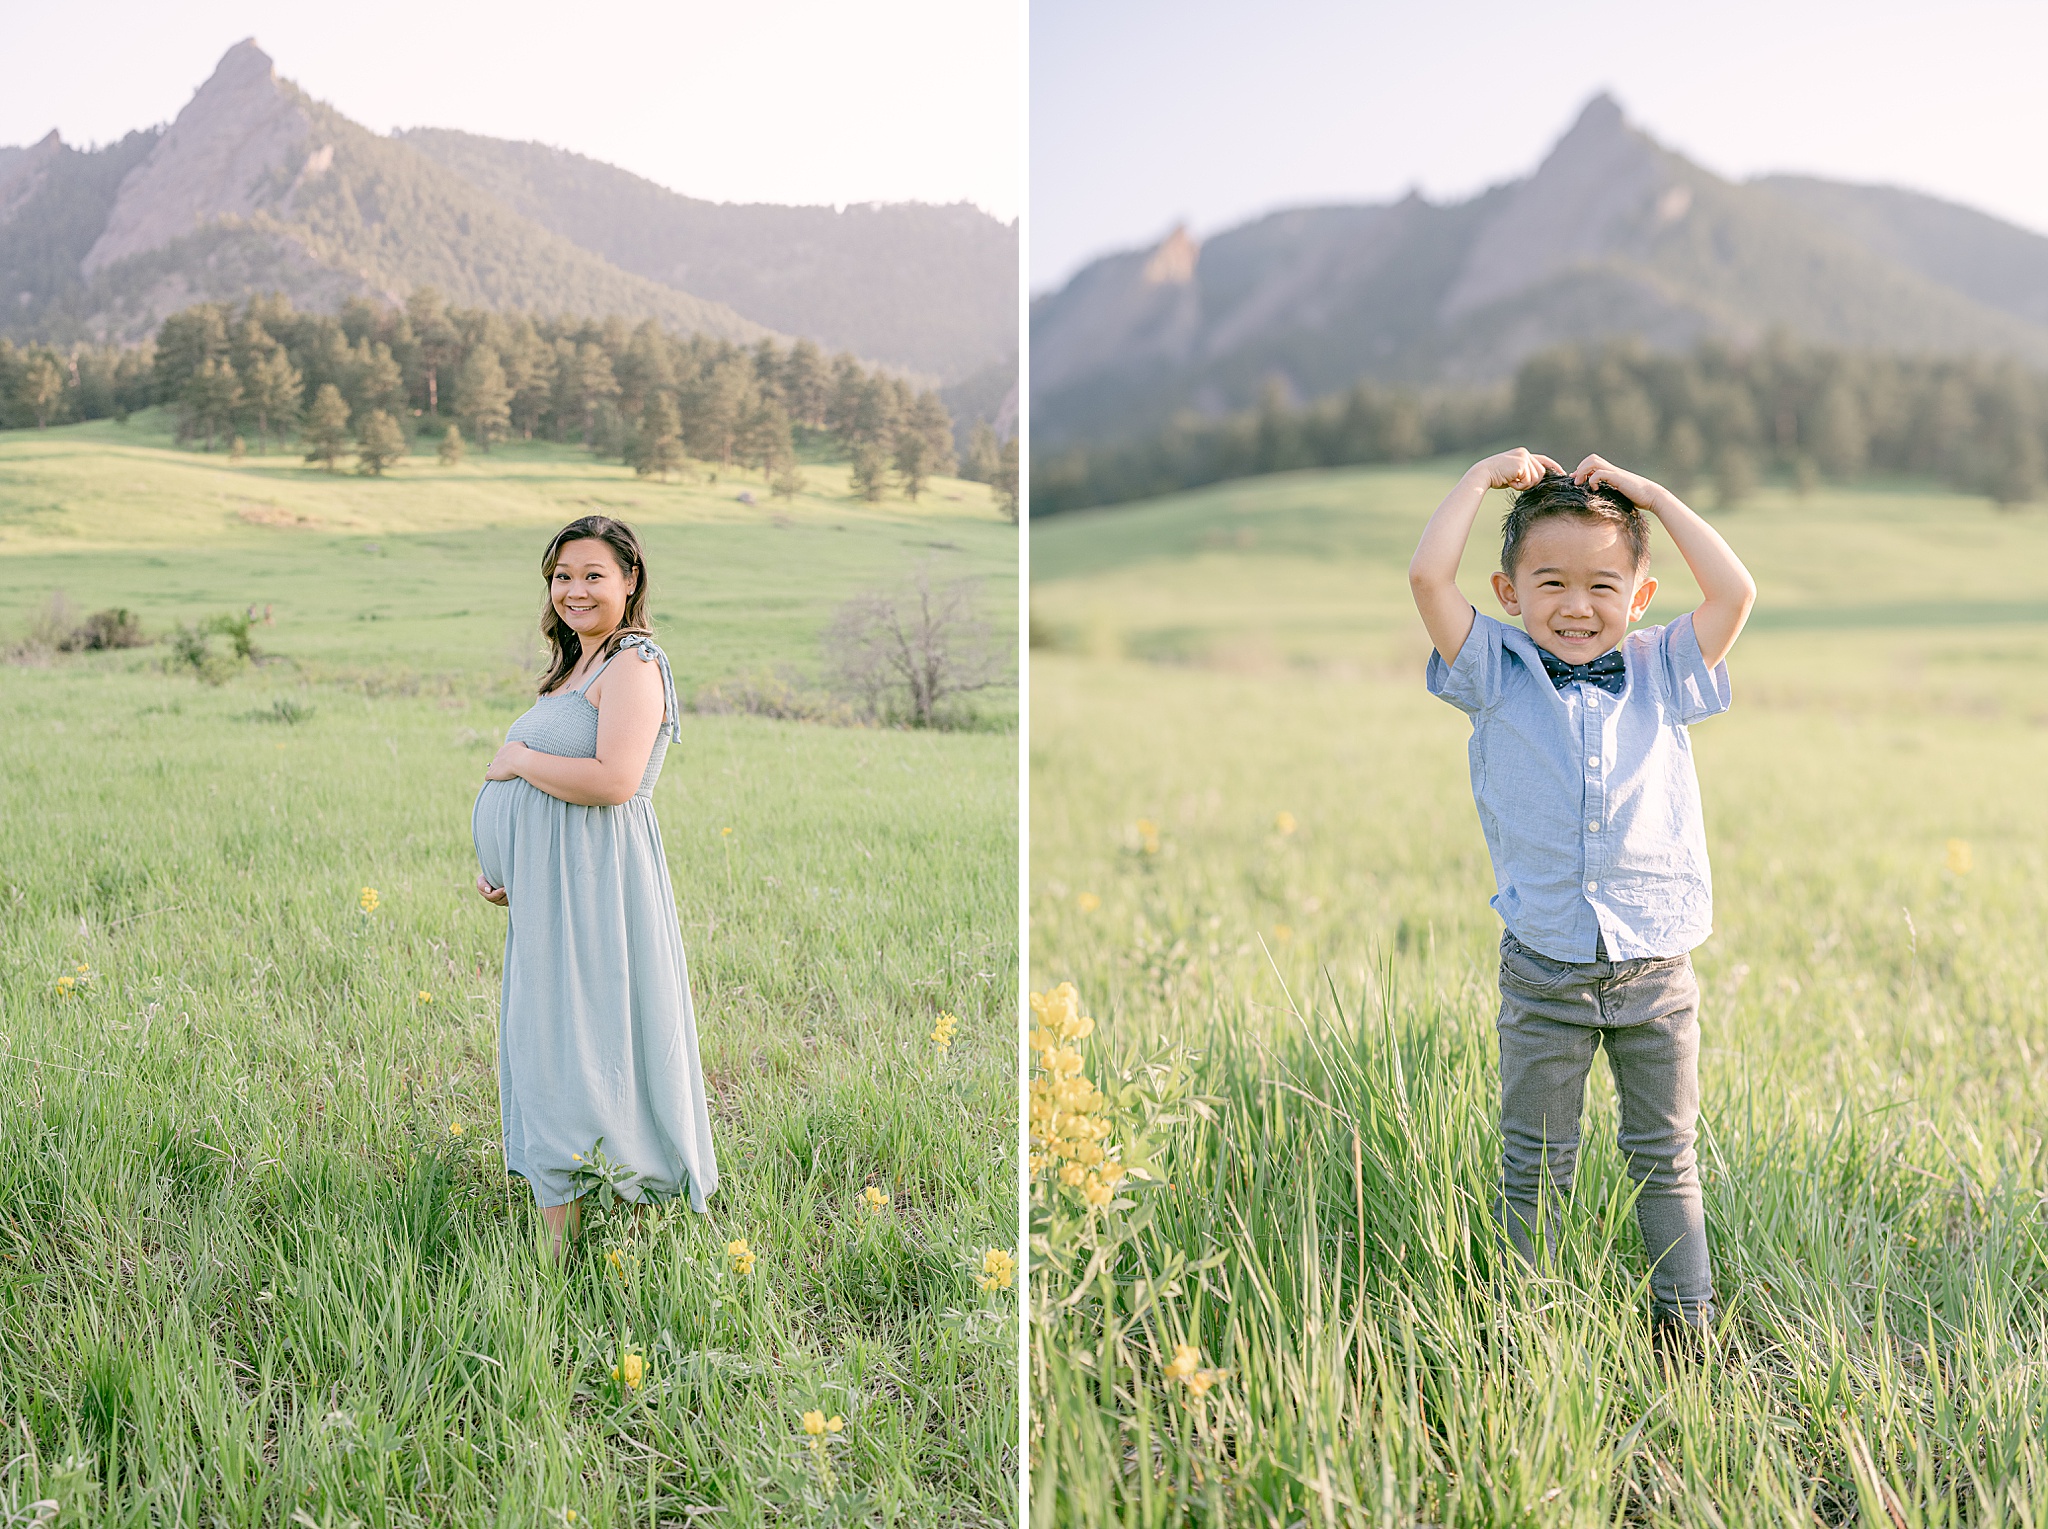 Individual portraits of mother and son taken in Chautauqua Park in Boulder, Colorado with mountains in the background